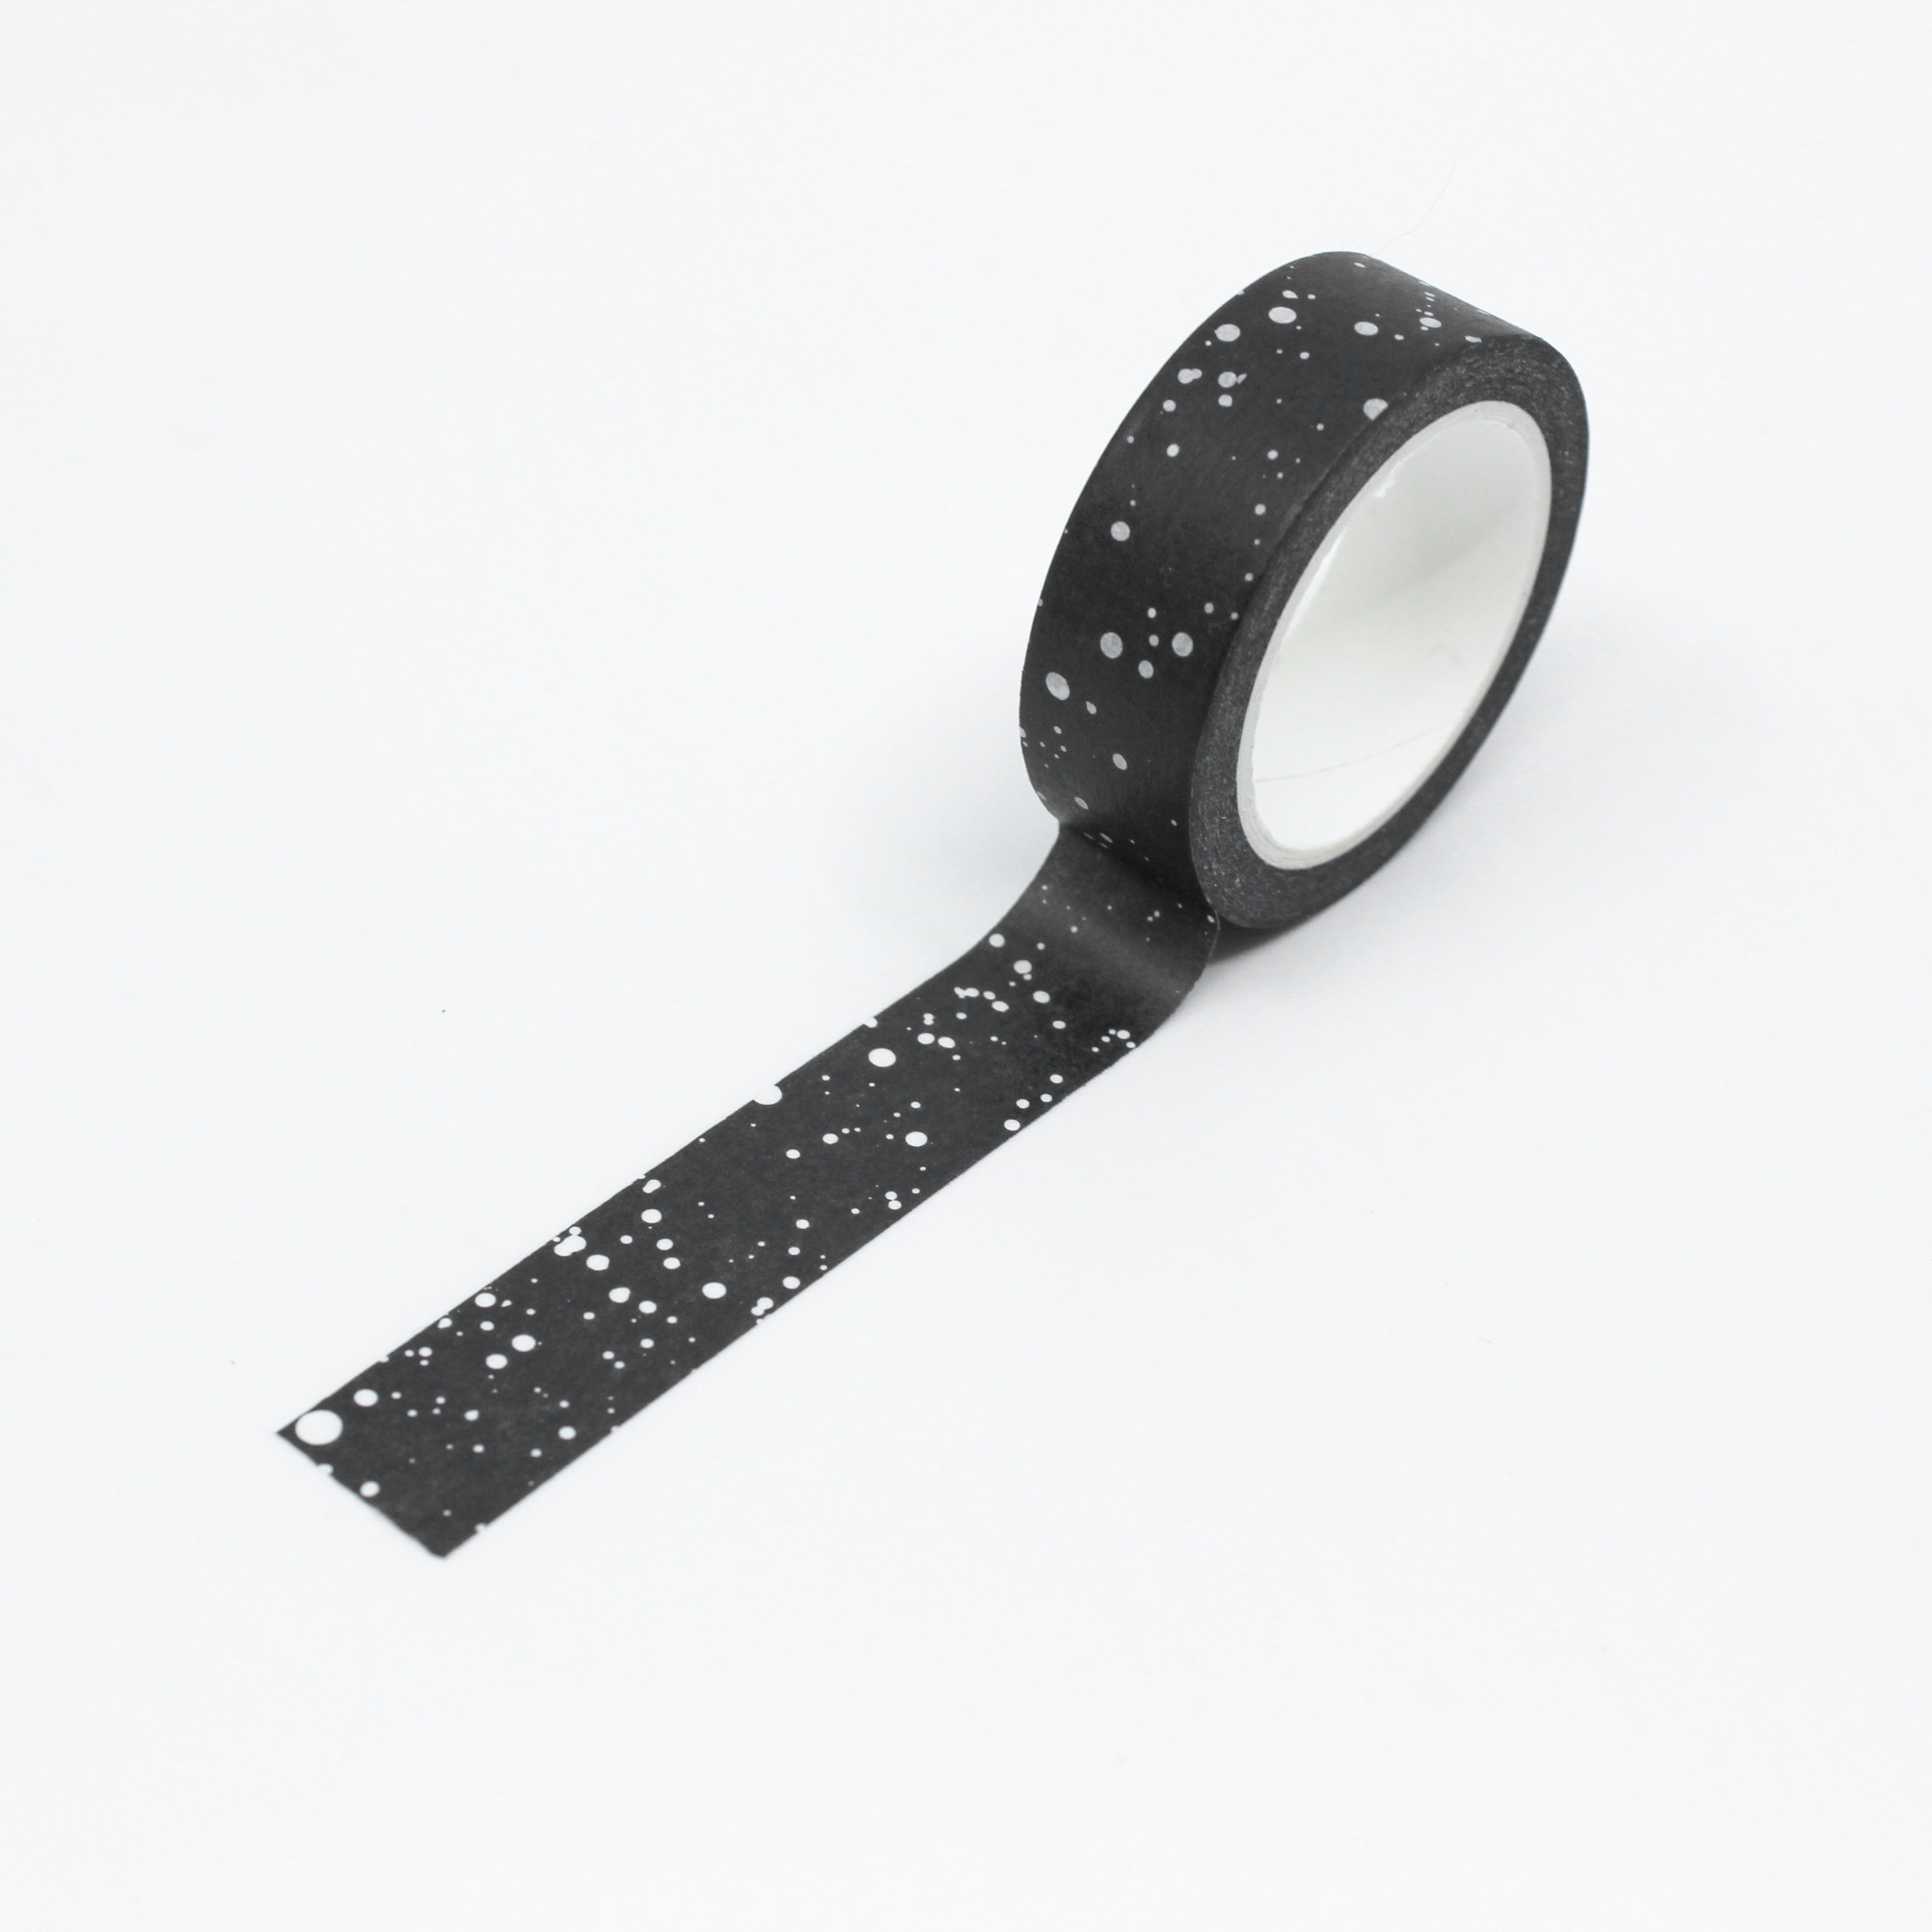 This photo is of a modern black and white paint Random dotted washi tape from worthwhile paper and sold at BBB Supplies craft and journaling shop.